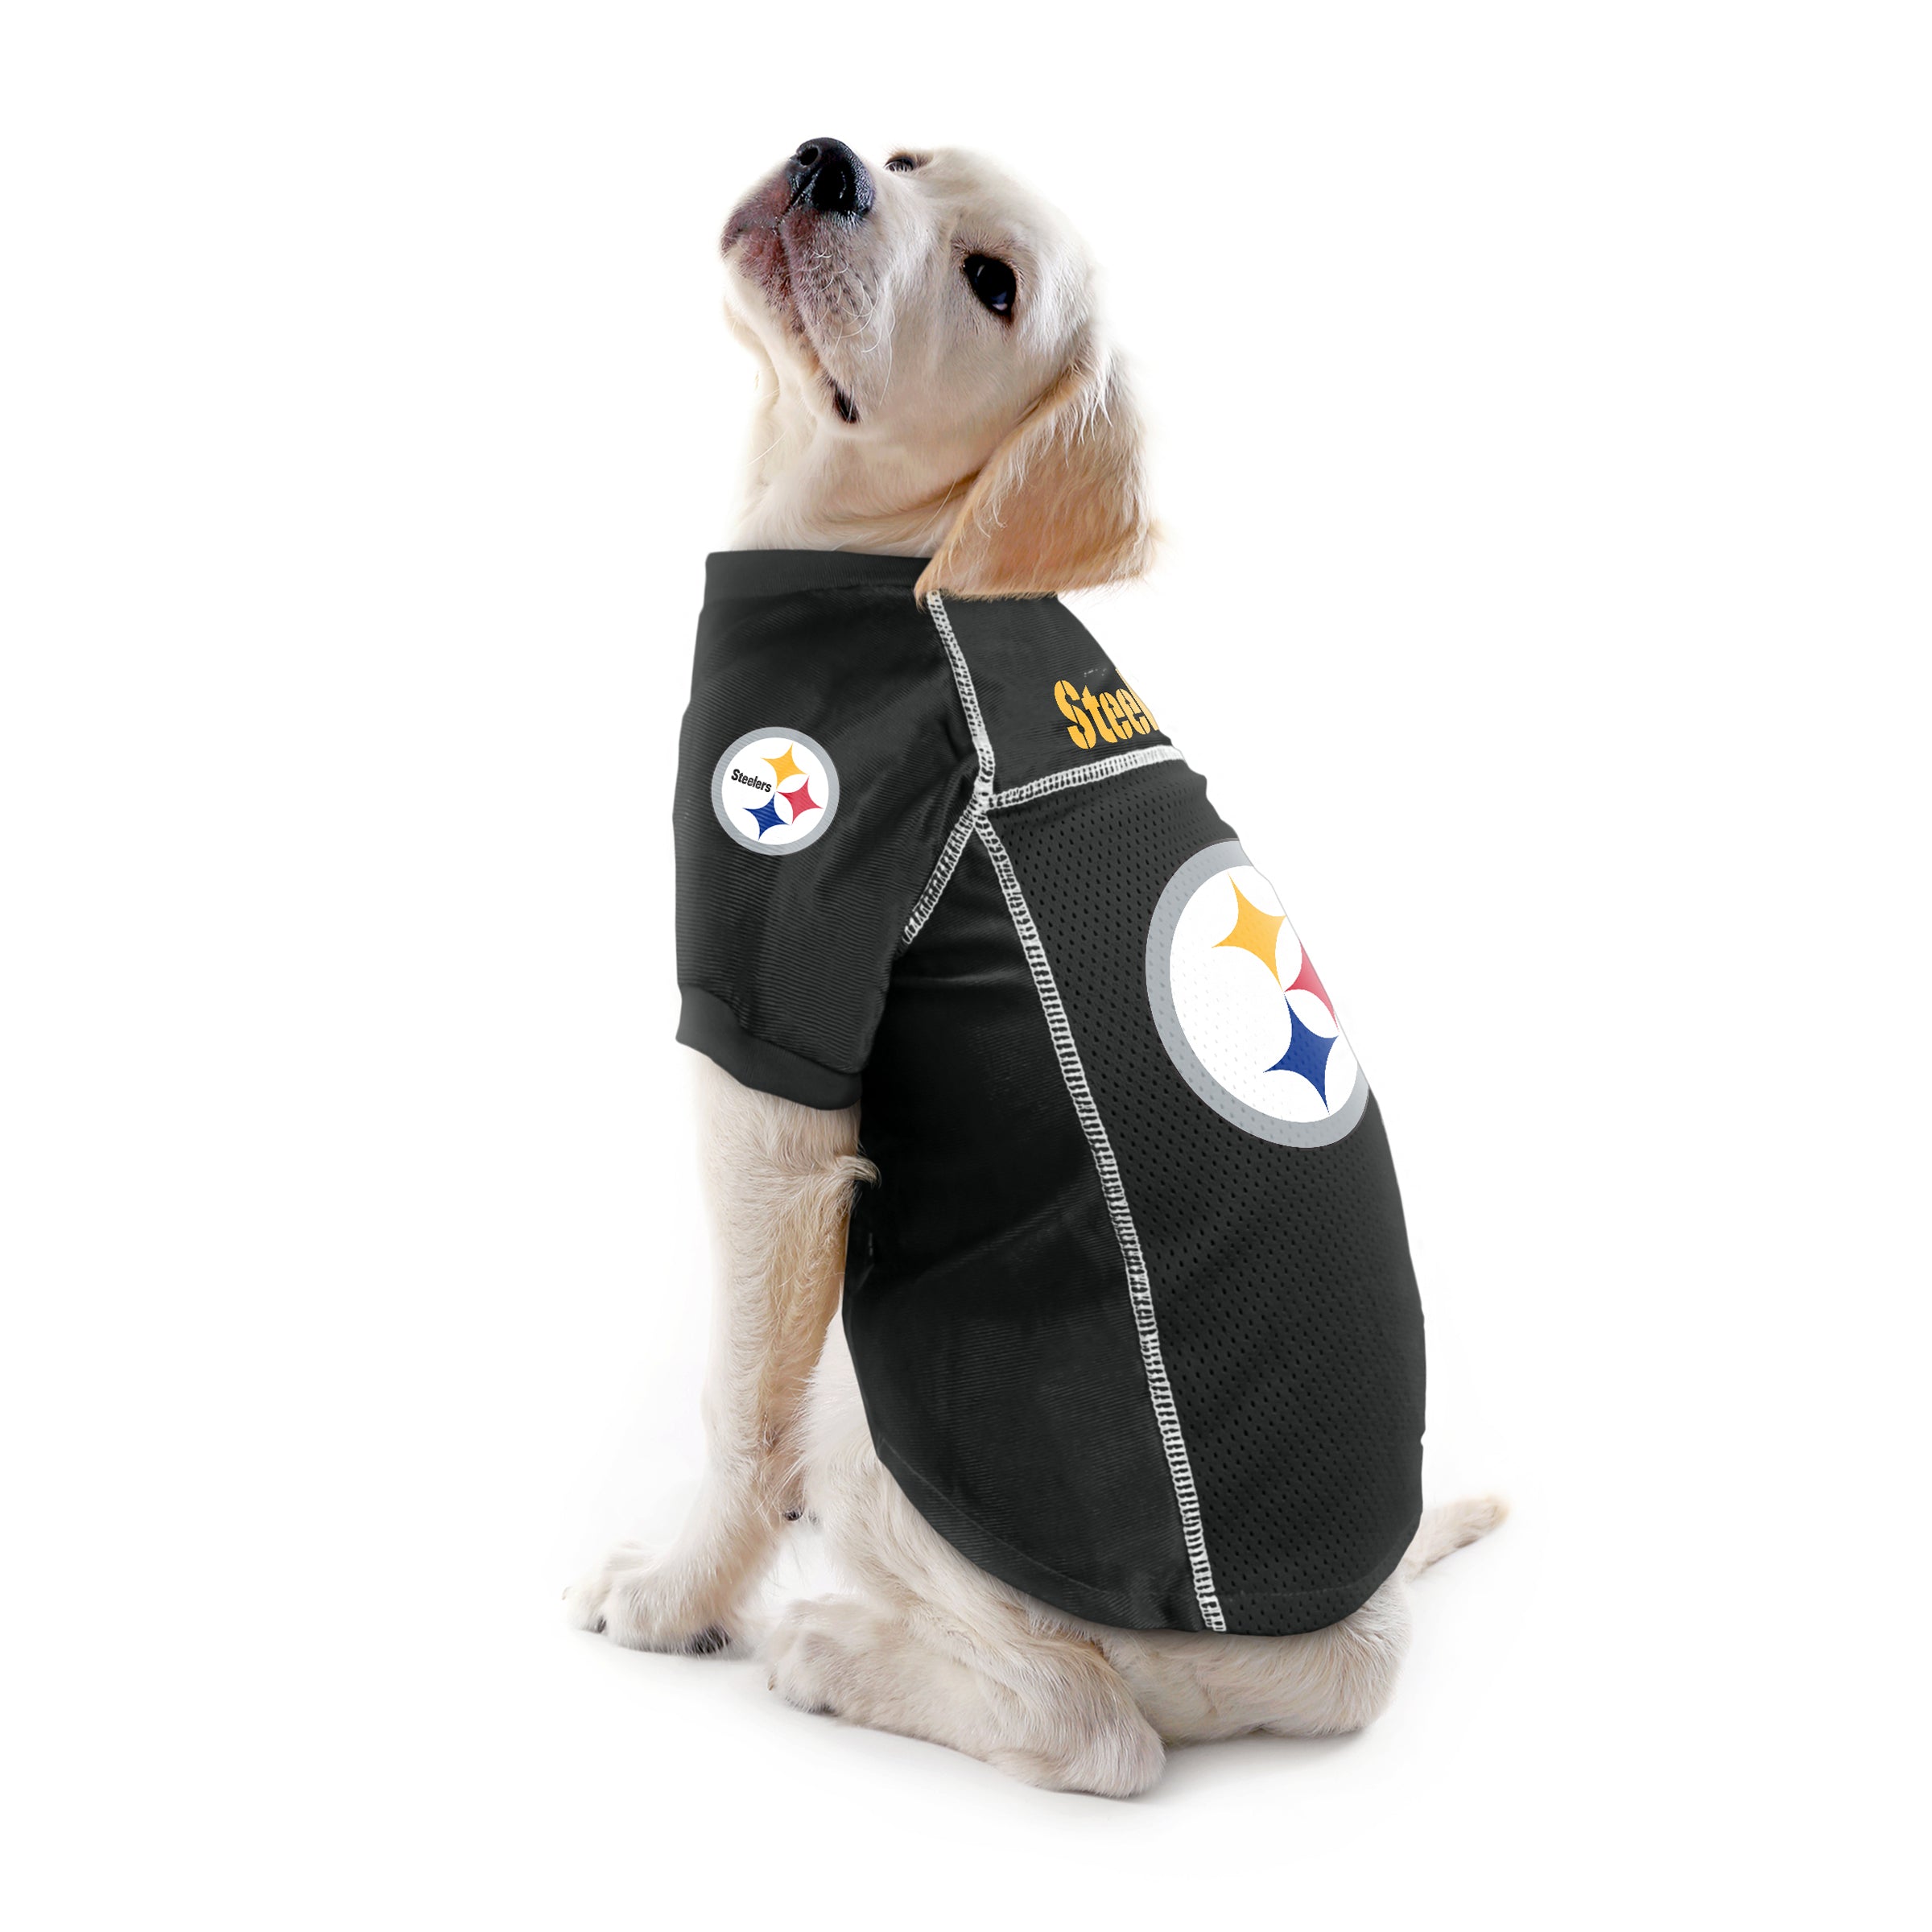  NFL Pittsburgh Steelers Dog Jersey, Size: XX-Large